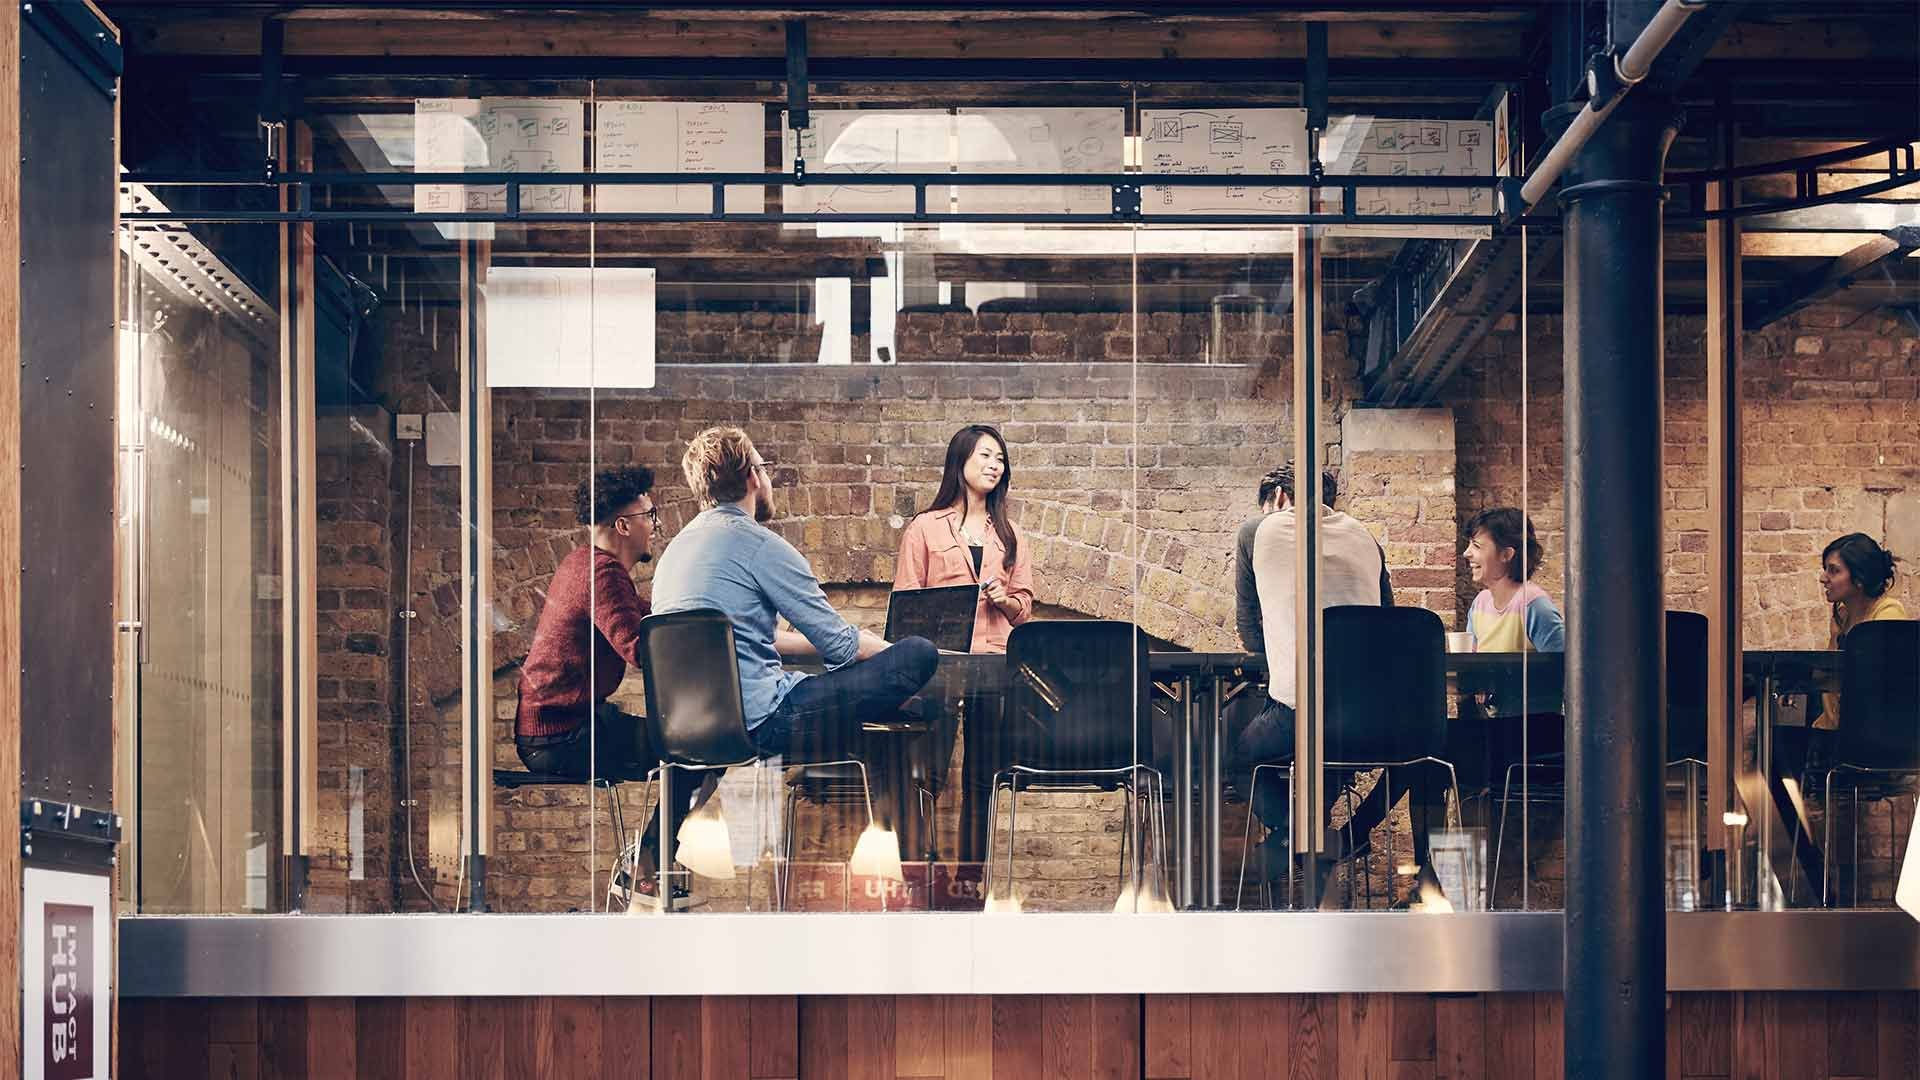 Group of people having a business meeting in modern office with brick walls